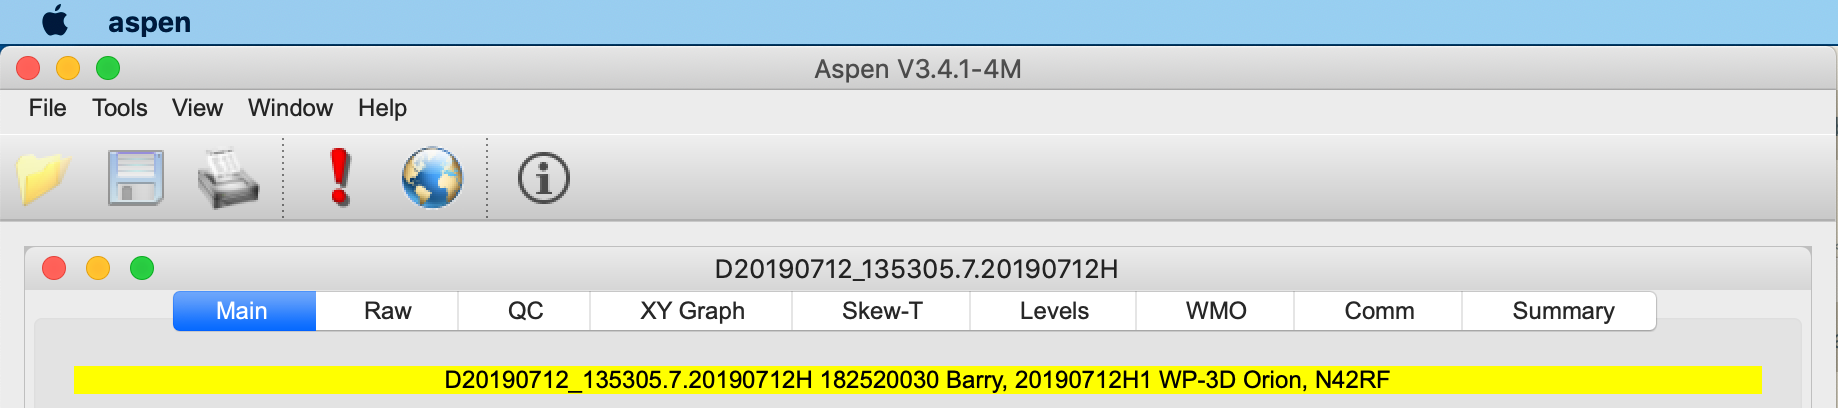 Screenshot showing the top of an ASPEN window with an open sounding, including icons and view tabs